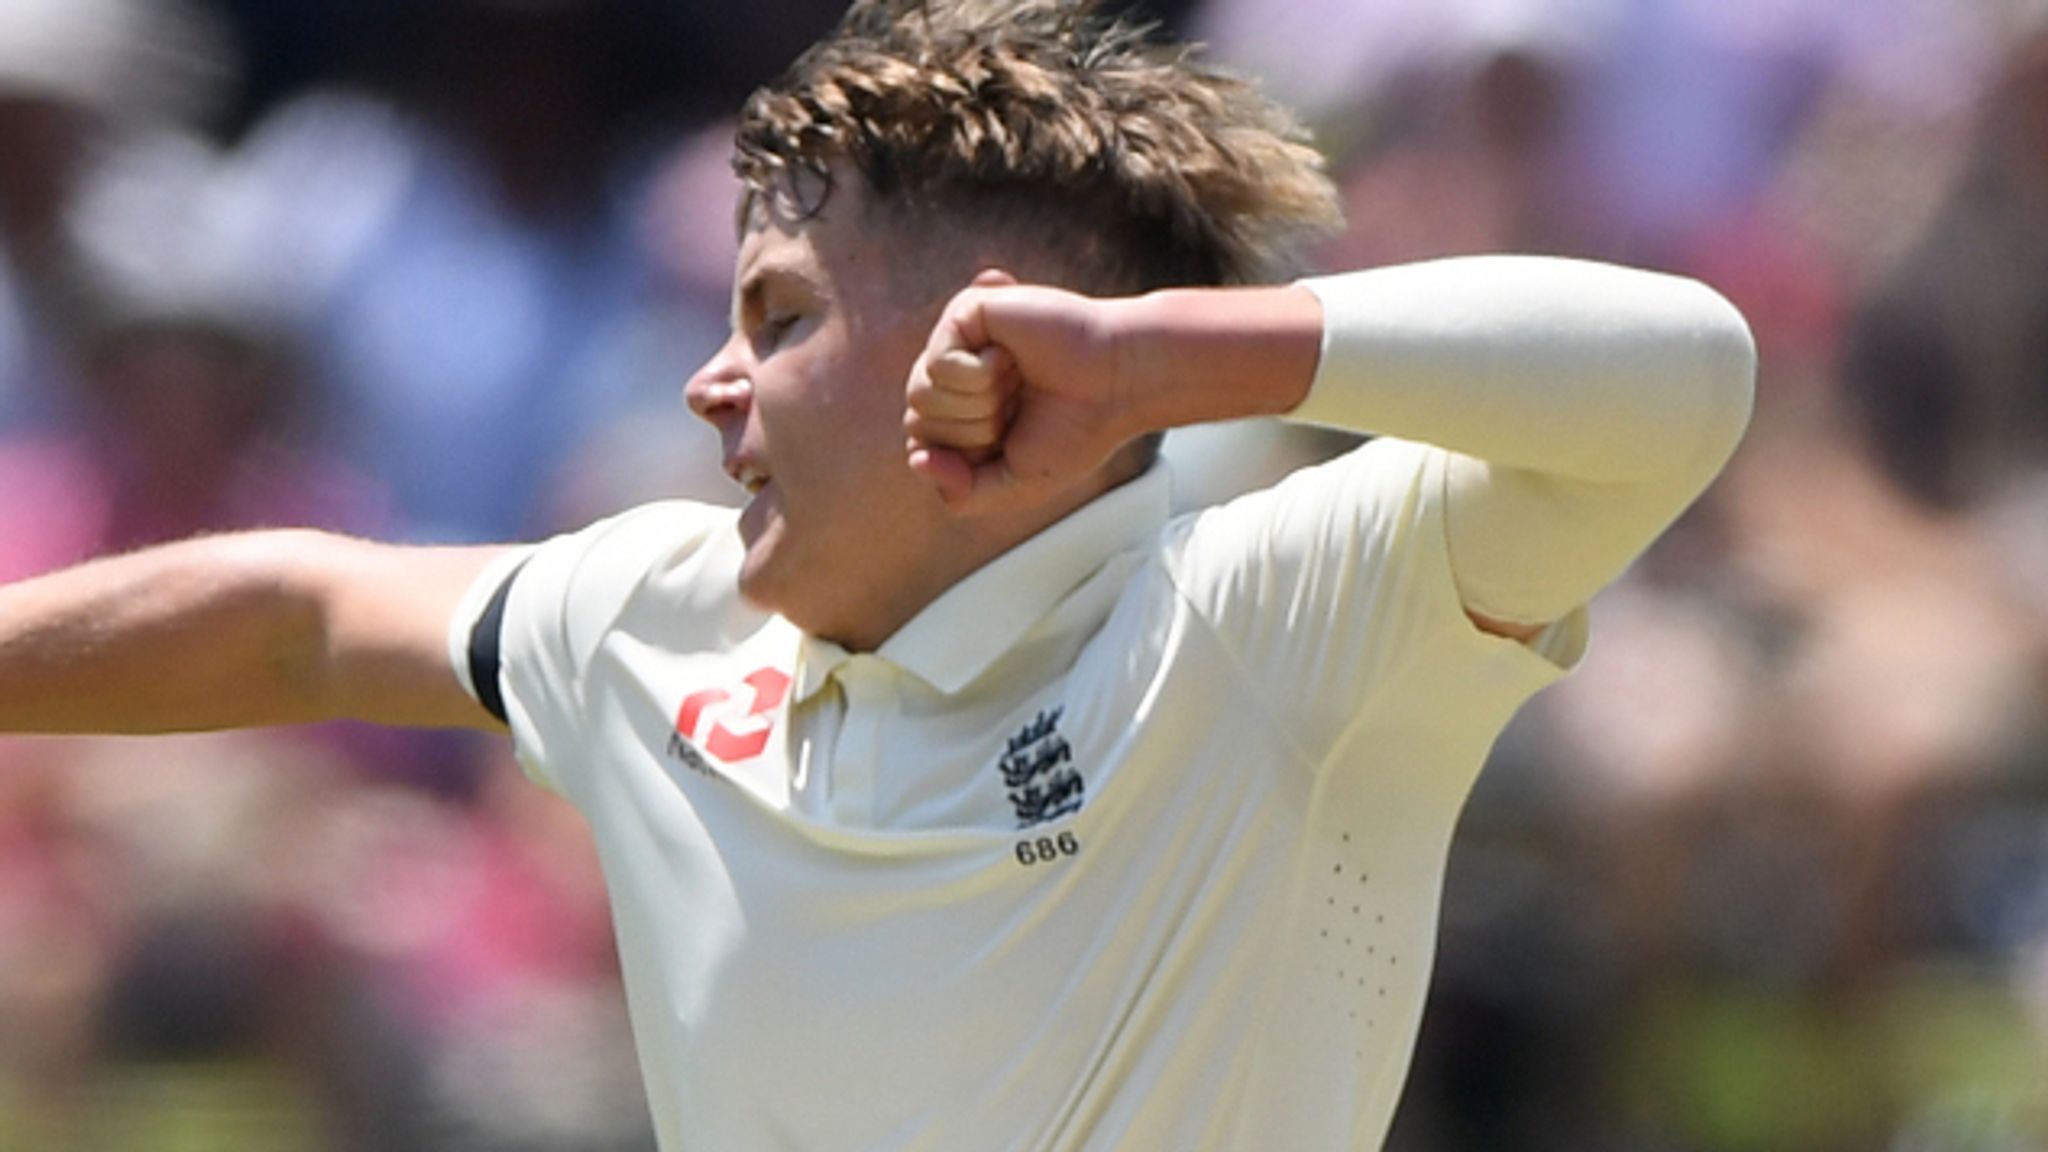 England Player Sam Curran / India Vs England 2021 Sam Curran Rested For 3rd Test To Avoid Bubble Fatigue, Find out more at ecb.co.uk sam curran reacts to his incredible 3